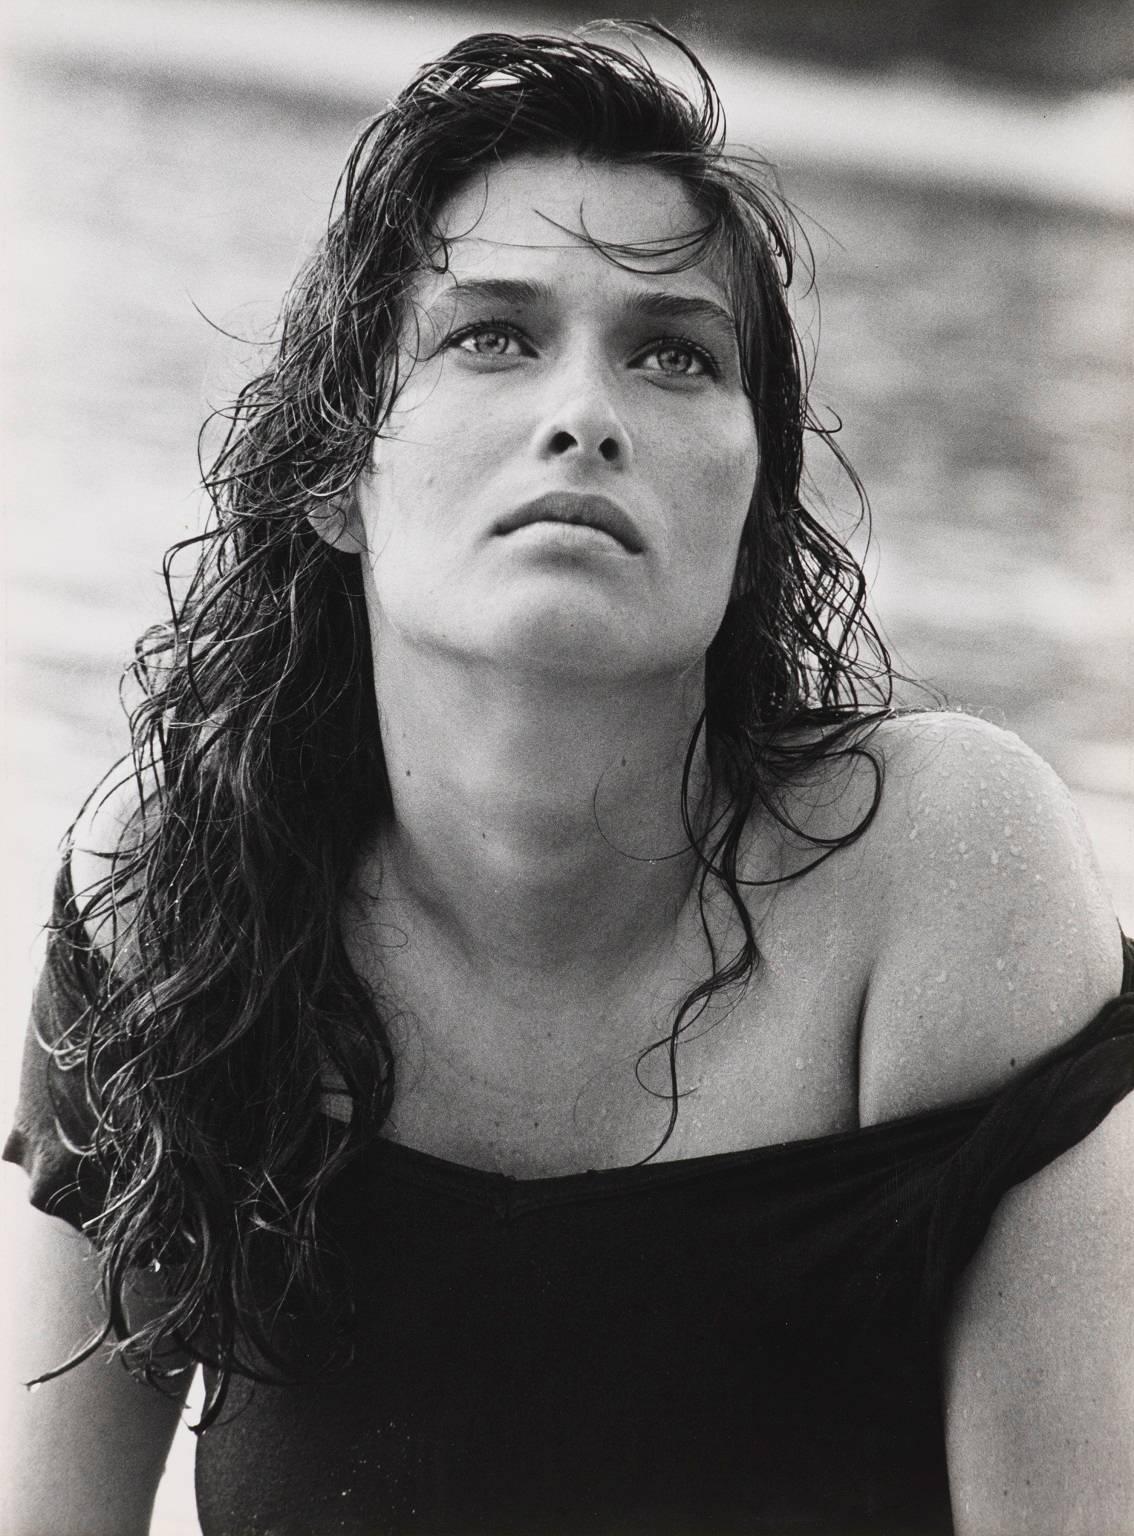 Bruce Weber Portrait Photograph - Rosemary Mc Groth, Fashion photography in black & white, woman portrait, 1981